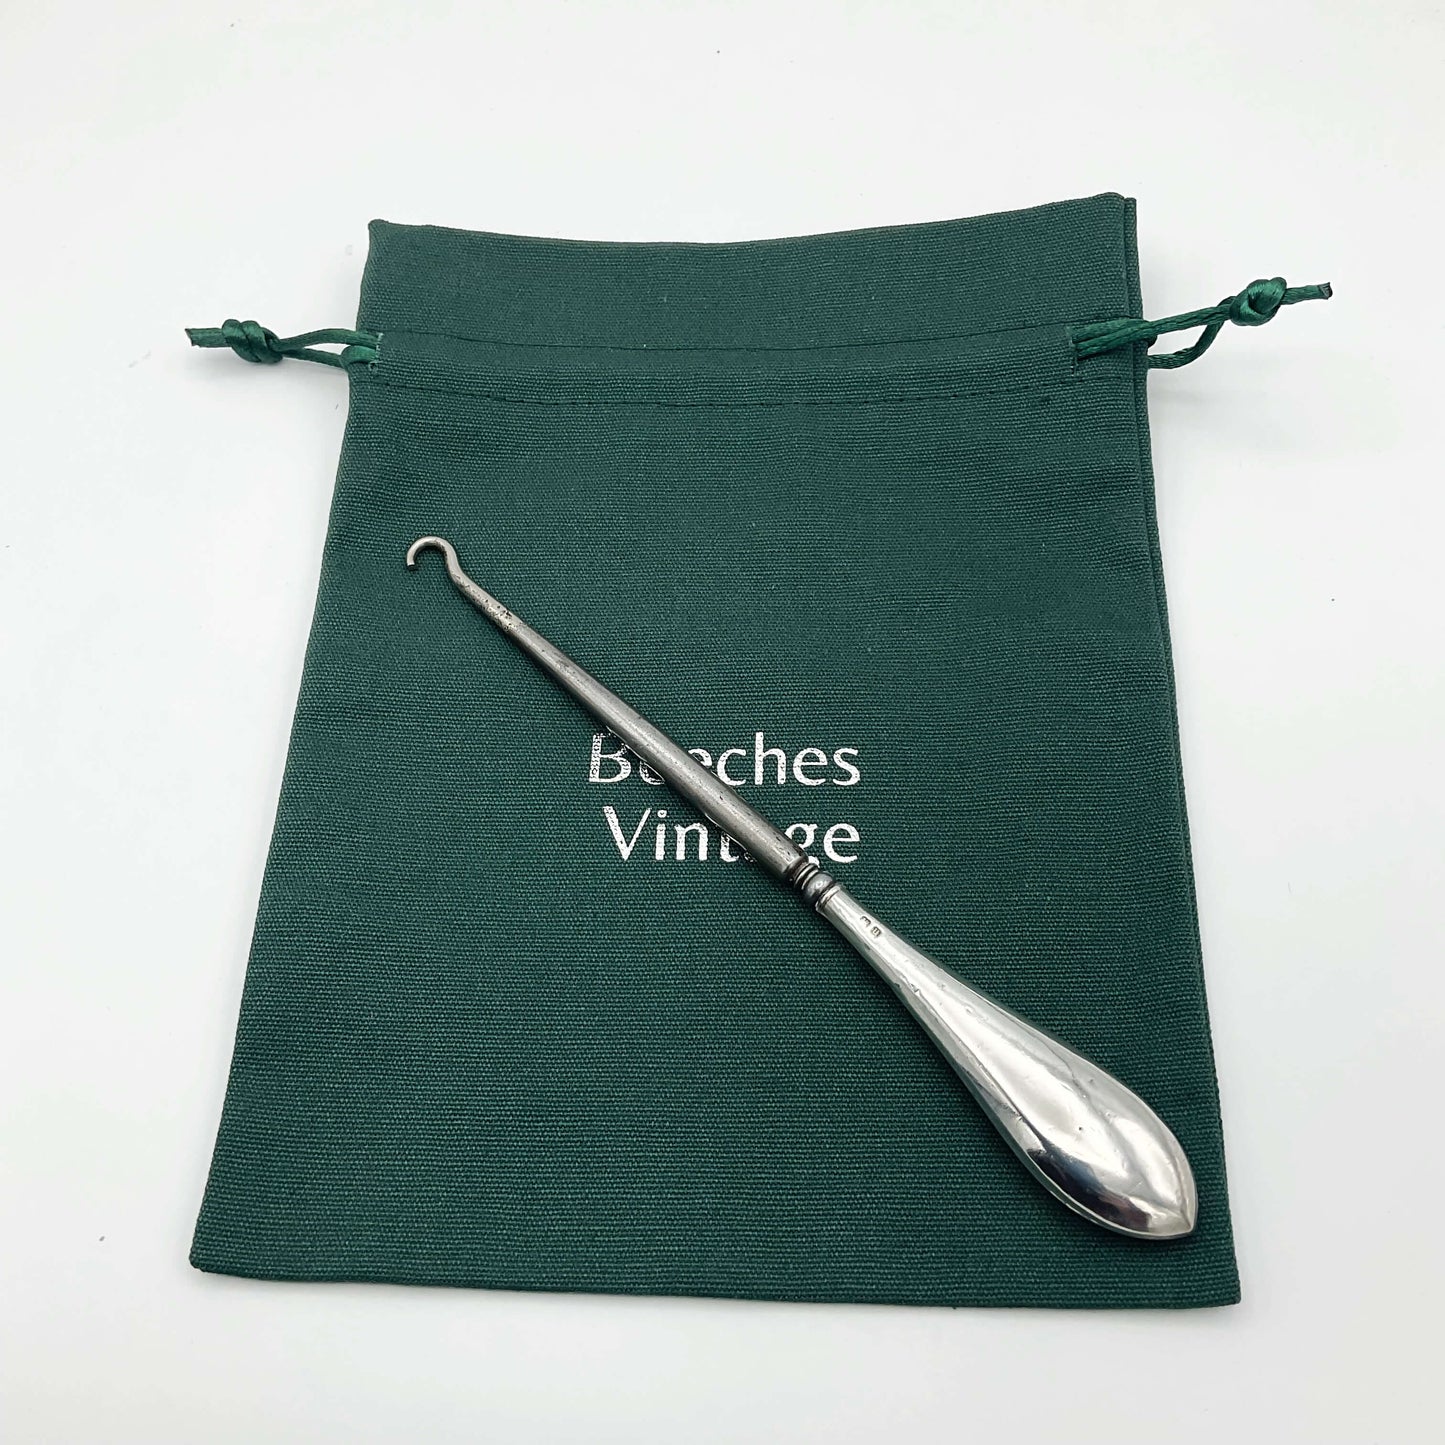 Silver handled button hook with a shiny handle and steel hook on a green cotton bag